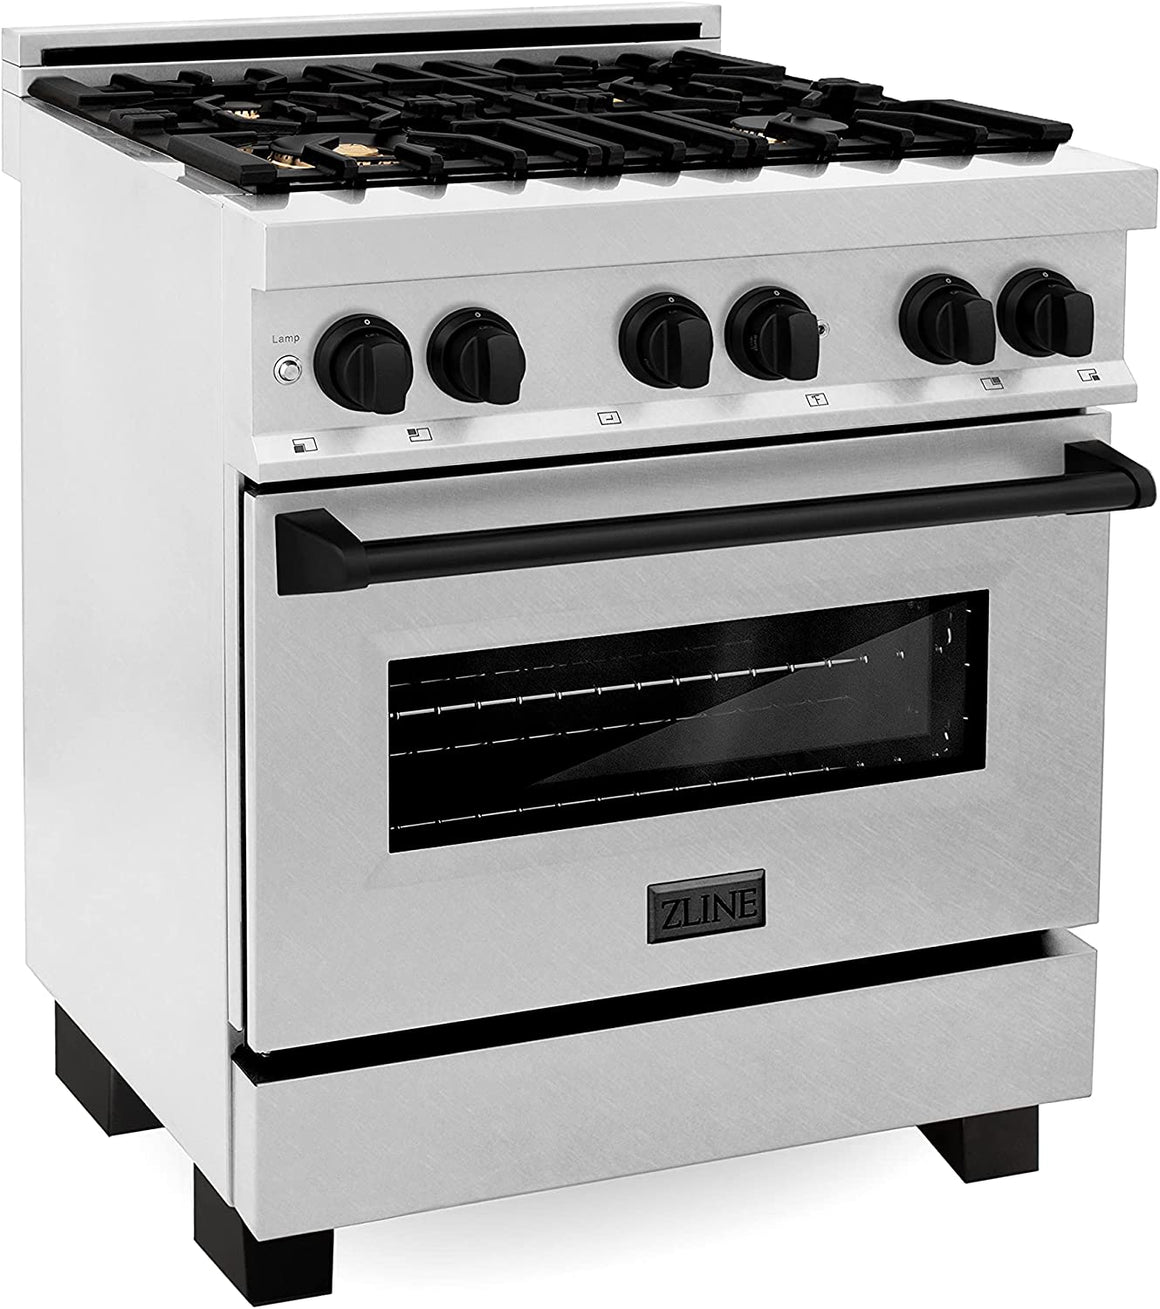 ZLINE Autograph Edition 30" 4.0 cu. ft. Dual Fuel Range in DuraSnow Stainless Steel with Matte Black Accents